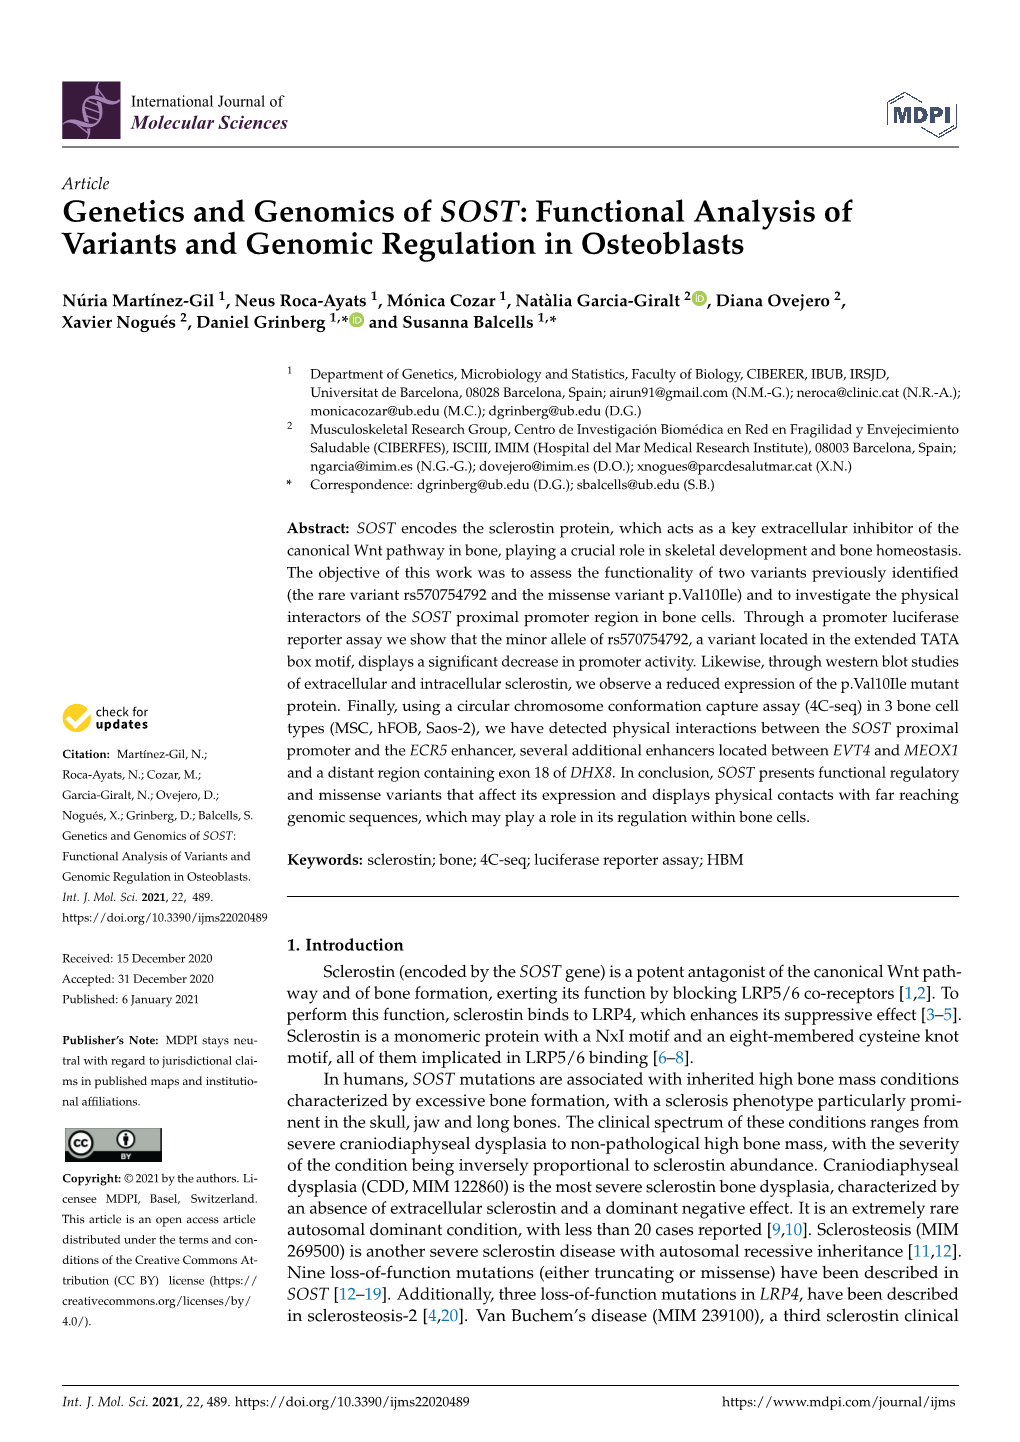 Functional Analysis of Variants and Genomic Regulation in Osteoblasts